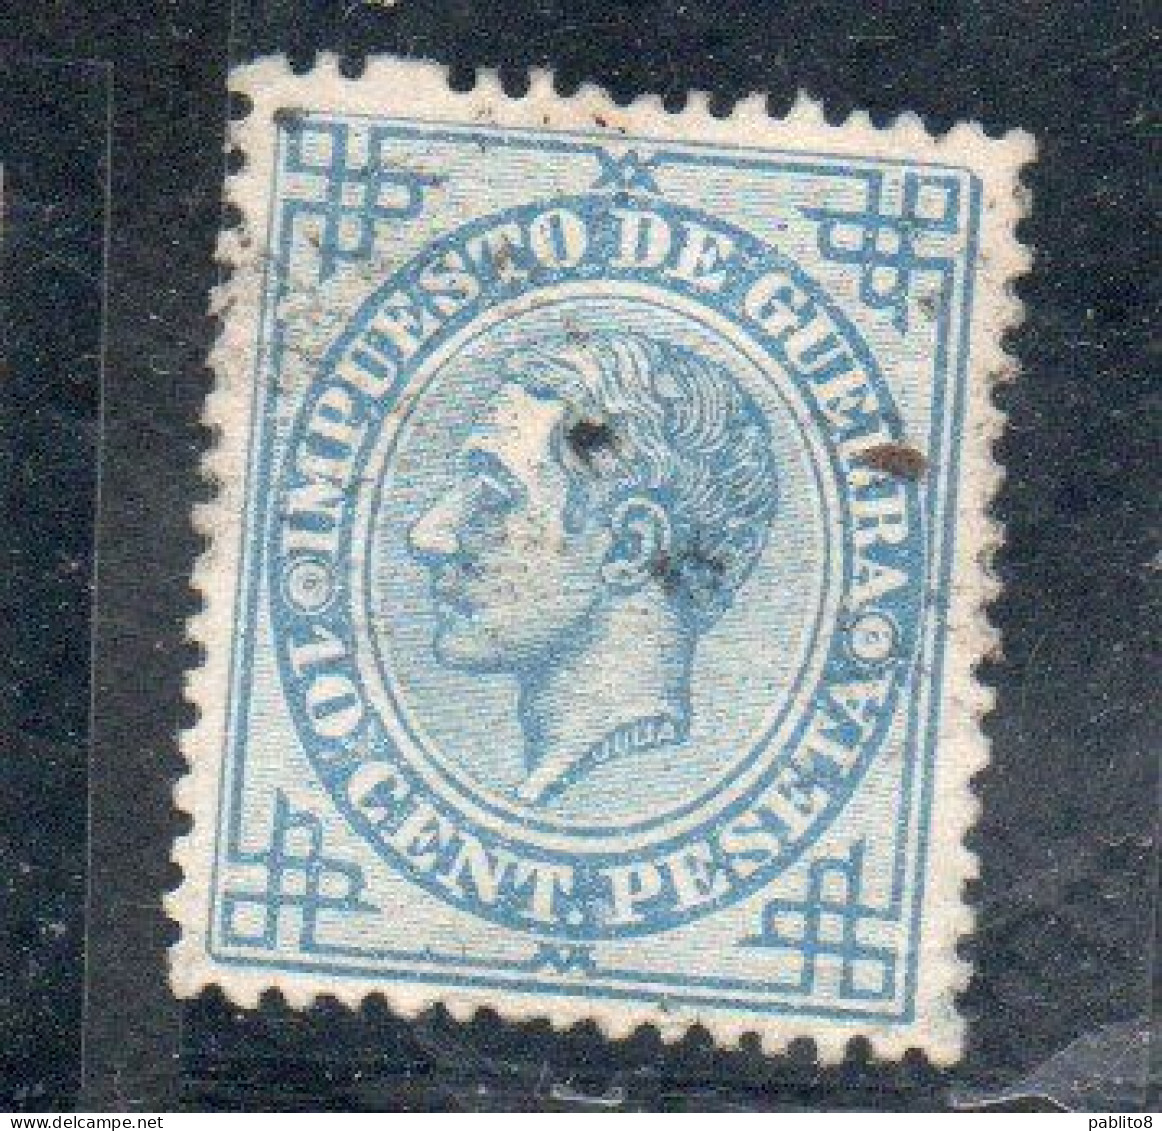 SPAIN ESPAÑA SPAGNA 1875 1876 WAR TAX STAMPS KING RE ROI ALFONSO XII 10c MH - Oorlogstaks